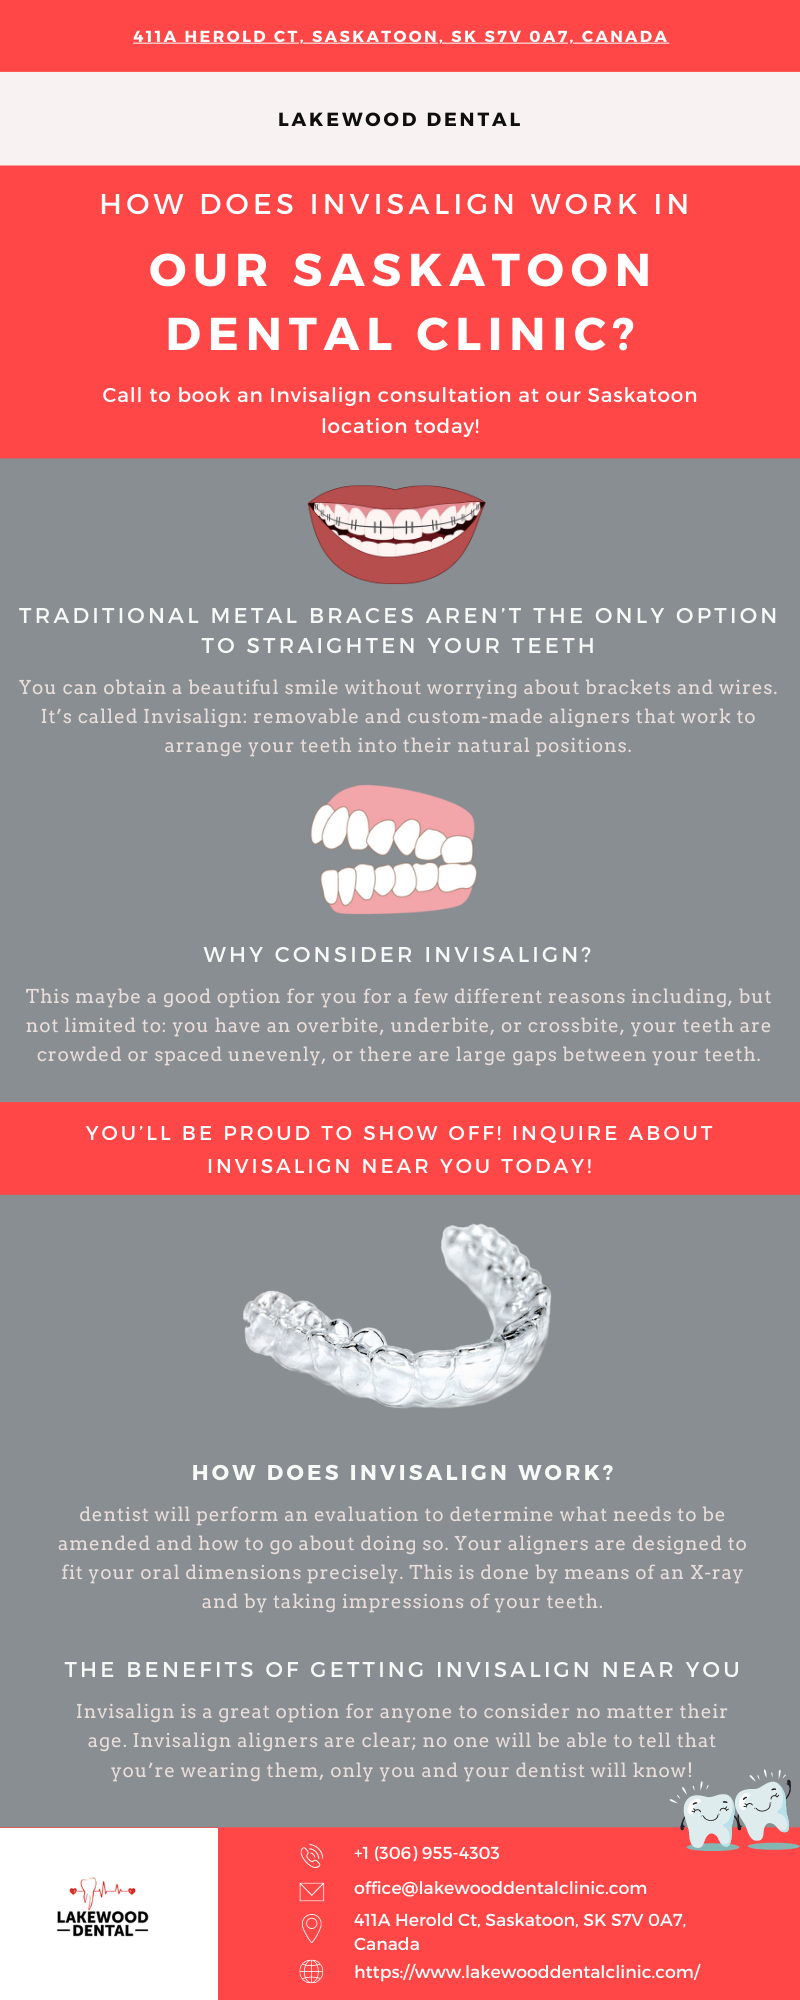 411A HEROLD CT. SASKATOON. SK S7V 0A7. CANADA

LAKEWOOD DENTAL

 

HOW DOES INVISALIGN WORK IN

OUR SASKATOON
DENTAL CLINIC?

Call to book an Invisalign consultation at our Saskatoon
location today!

Yd

TRADITIONAL METAL BRACES AREN'T THE ONLY OPTION
TO STRAICHTEN YOUR TEETH

  

You can obtain a beaut

 
 

 

JERE

 

tom-made aligners that v

arrange your teeth into their natural

 

tions

WHY CONSIDER INVISALIGN?

maybe a good option for you for a few different reasons including, but

 

imited to: you have an overbite, underbite, or crossbite, your teeth are

 

d or spaced unevenly, or there are larg

 

gaps between your teeth

YOU'LL BE PROUD TO SHOW OFF! INQUIRE ABOUT
INVISALIGN NEAR YOU TODAY!

 

HOW DOES INVISALIGN WORK?

I perform an evaluation to determine what needs to be
ers are designed to
fit your oral dimensions precisely. This is done by means of an X-ray

 

 

amended and h

 

v to go about doing so. Your alig

and by taking impressions of your teeth

THE BENEFITS OF GETTING INVISALIGN NEAR YOU

ider no matter their
be able to tell that

Invisalign is a great option for anyone to con

 

 

age Invisalign al s are clear; no one w

 
 

you're wearing them, only you and your dentist will kno

   

*1 (306) 955-4303
office@lakewooddentalclinic com

411A Herold Ct. Saskatoon. SK S7V 0A7.
Canada

https//www lakewooddentalclinic. com/